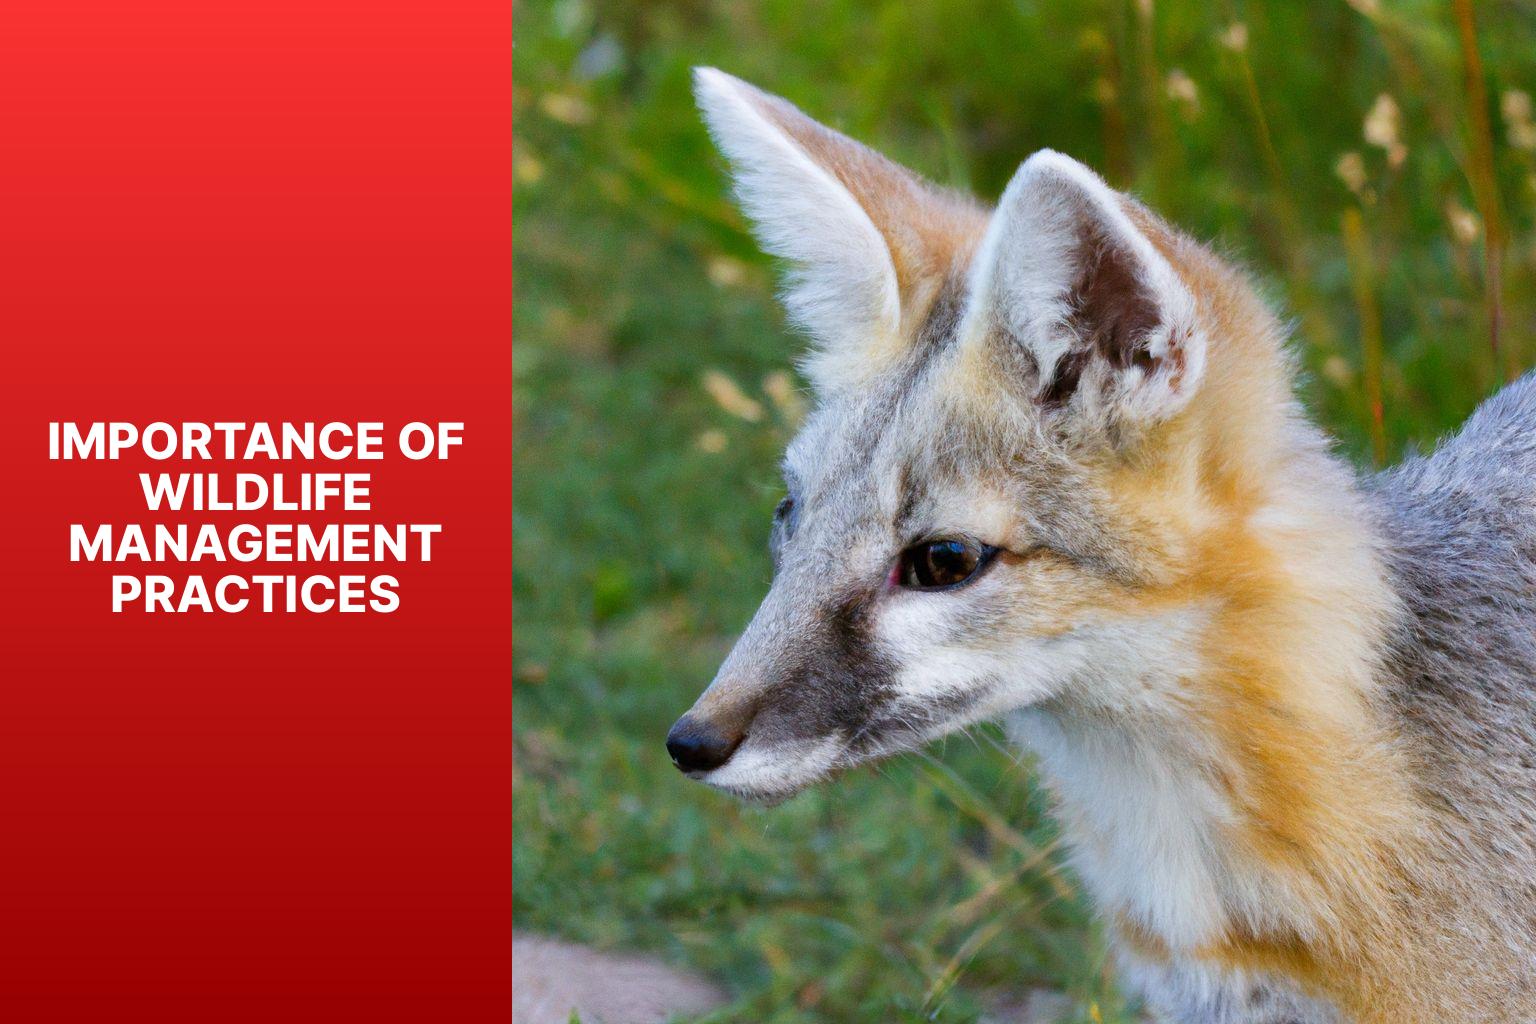 Importance of Wildlife Management Practices - Kit Fox in Wildlife Management Practices 